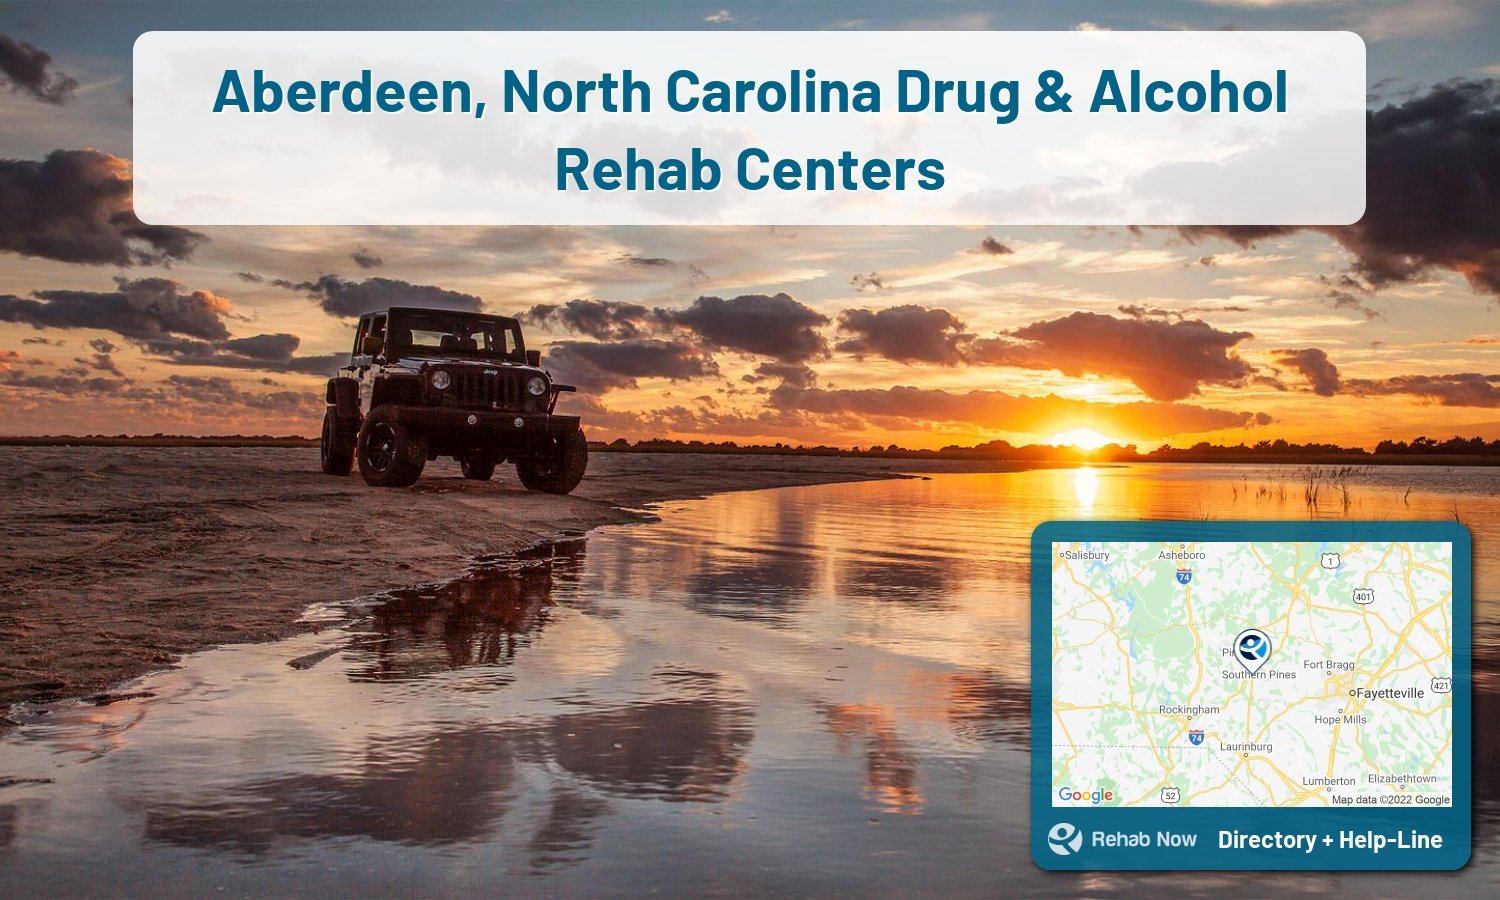 List of alcohol and drug treatment centers near you in Aberdeen, North Carolina. Research certifications, programs, methods, pricing, and more.